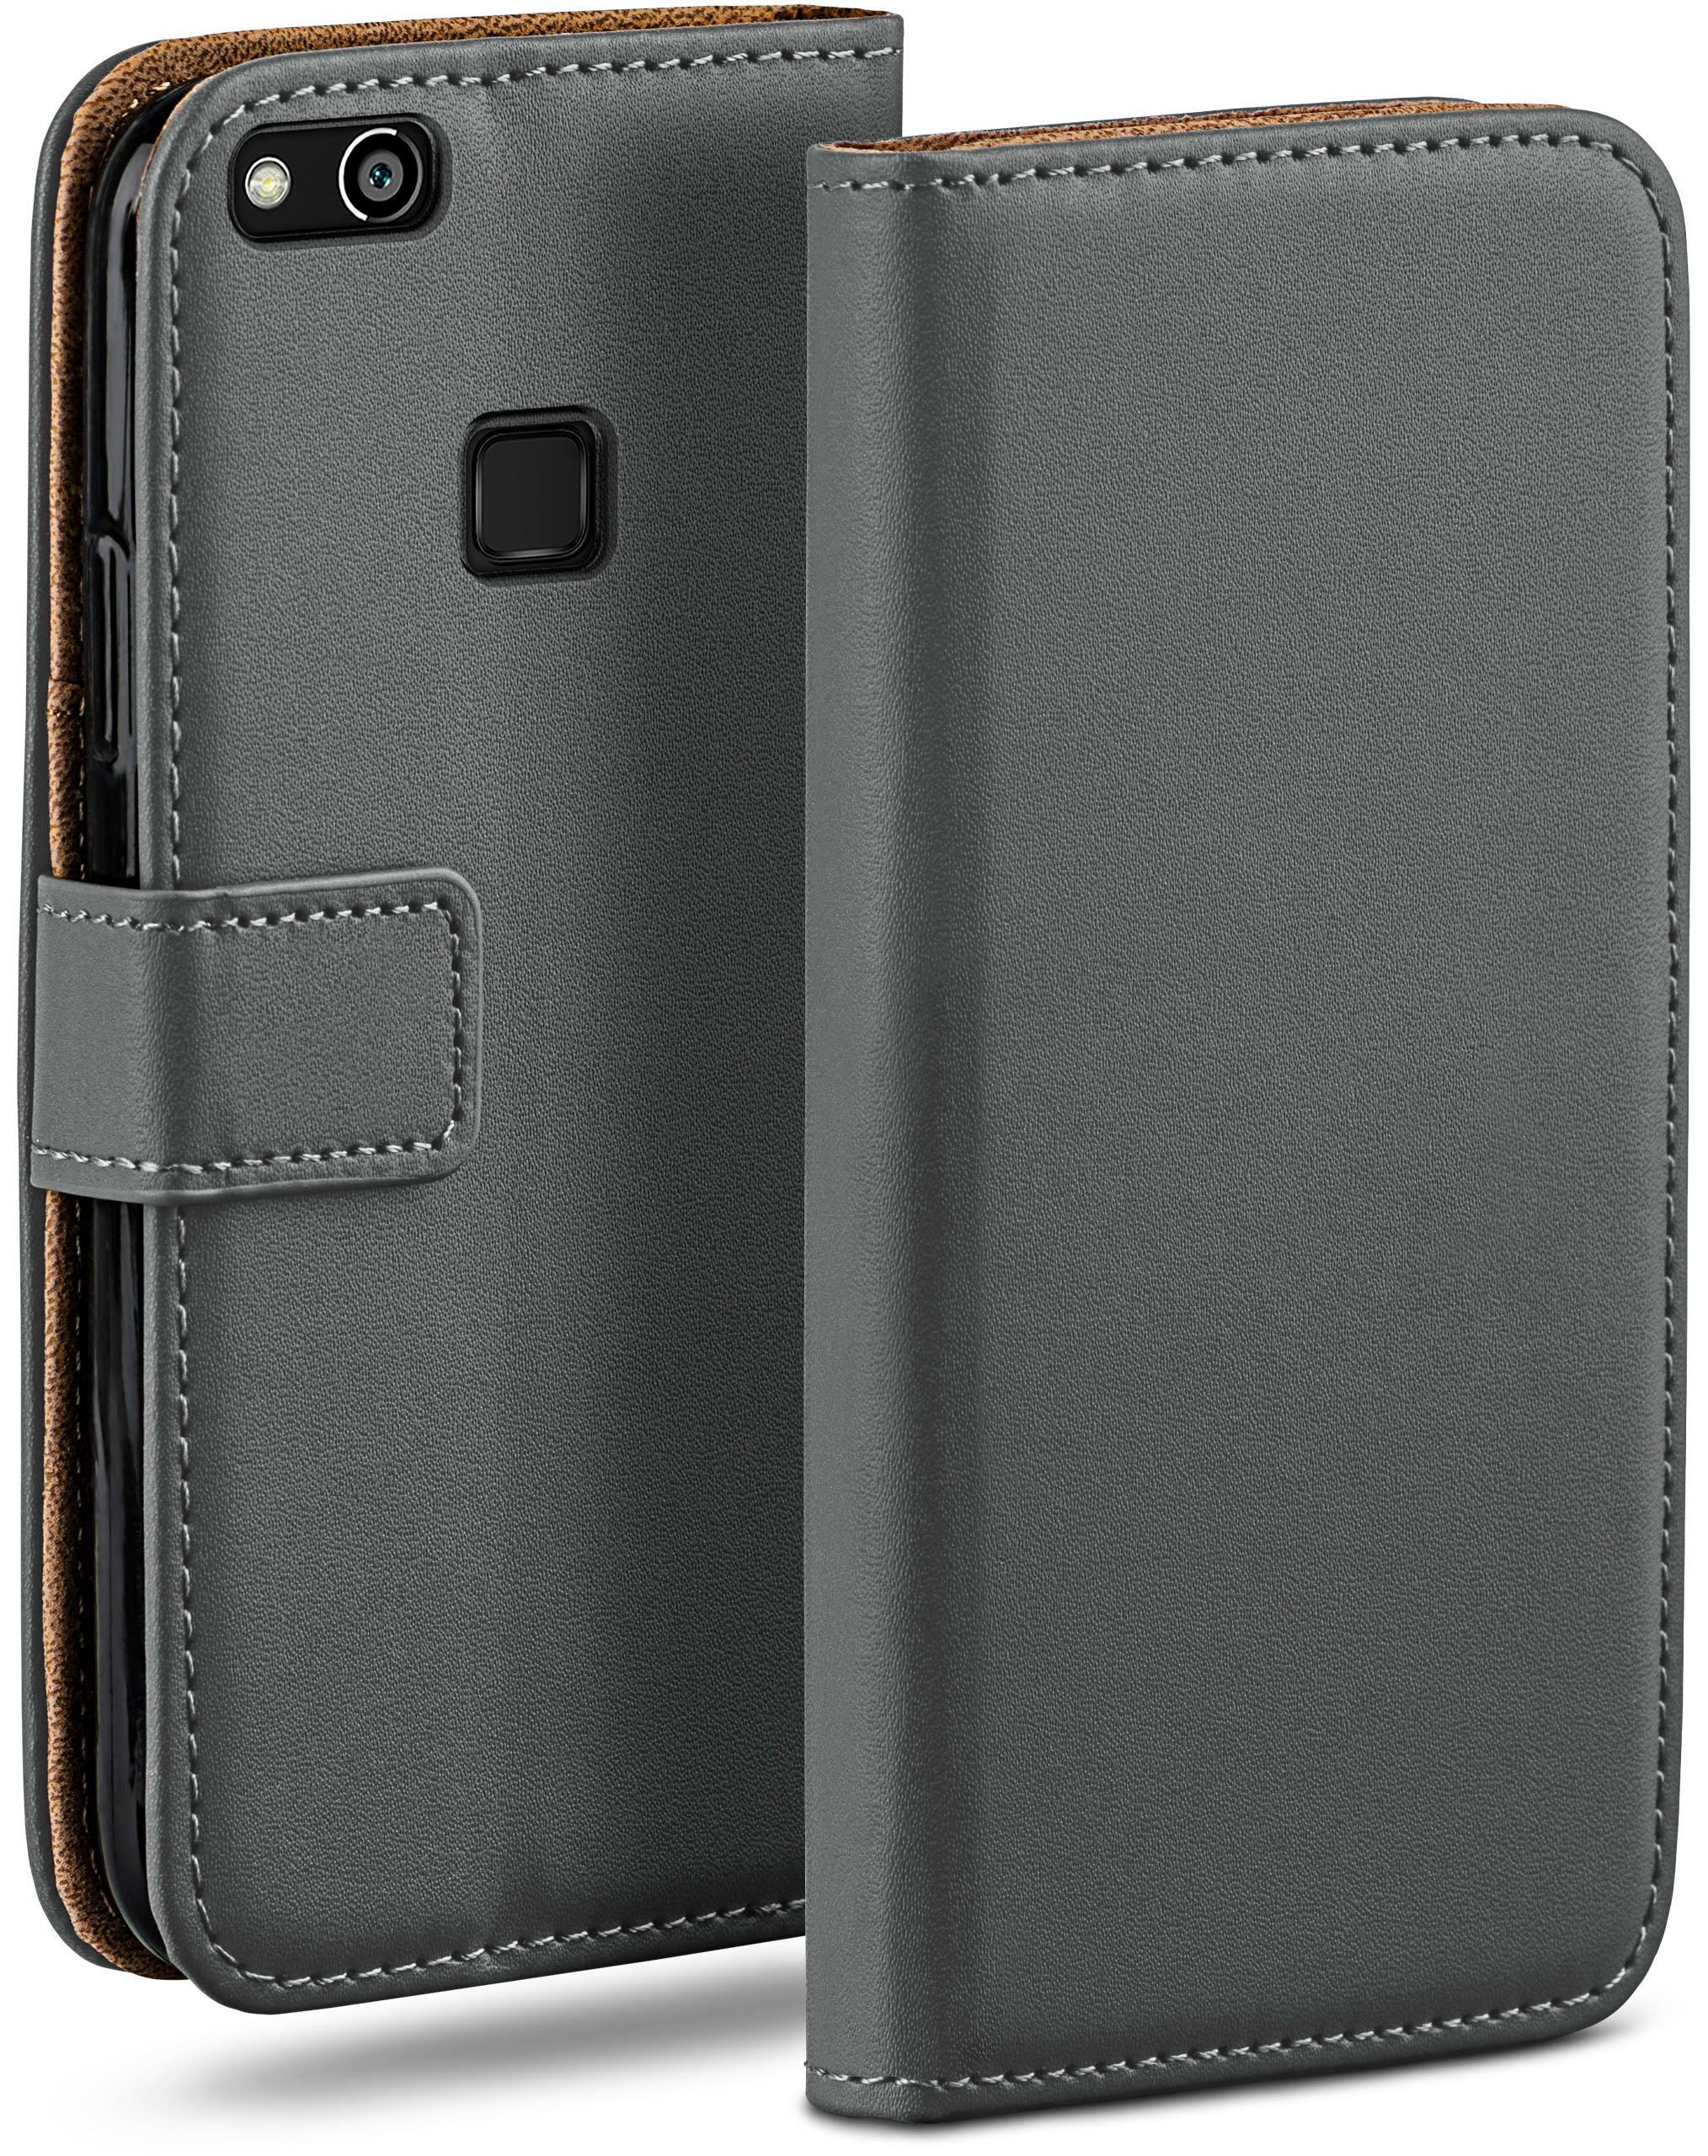 Book Huawei, Lite, MOEX Anthracite-Gray Case, P10 Bookcover,